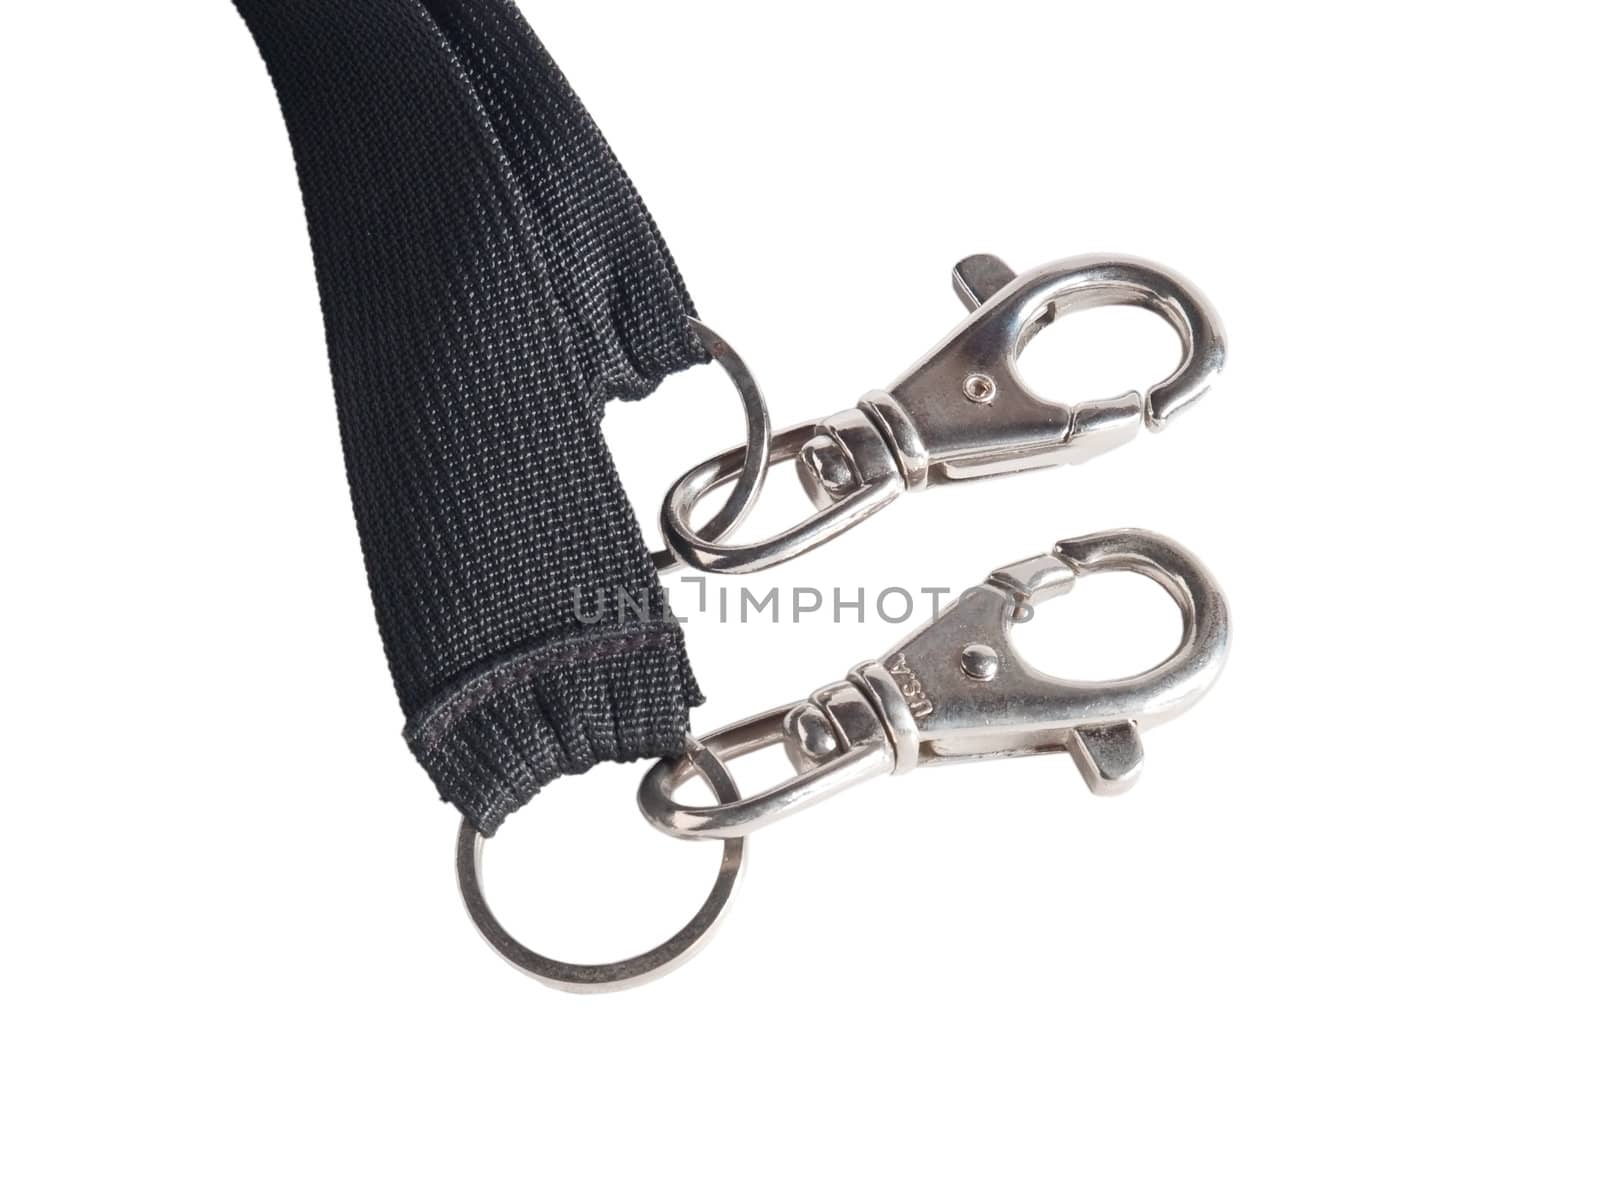 Shoulder strap with hooks on white background